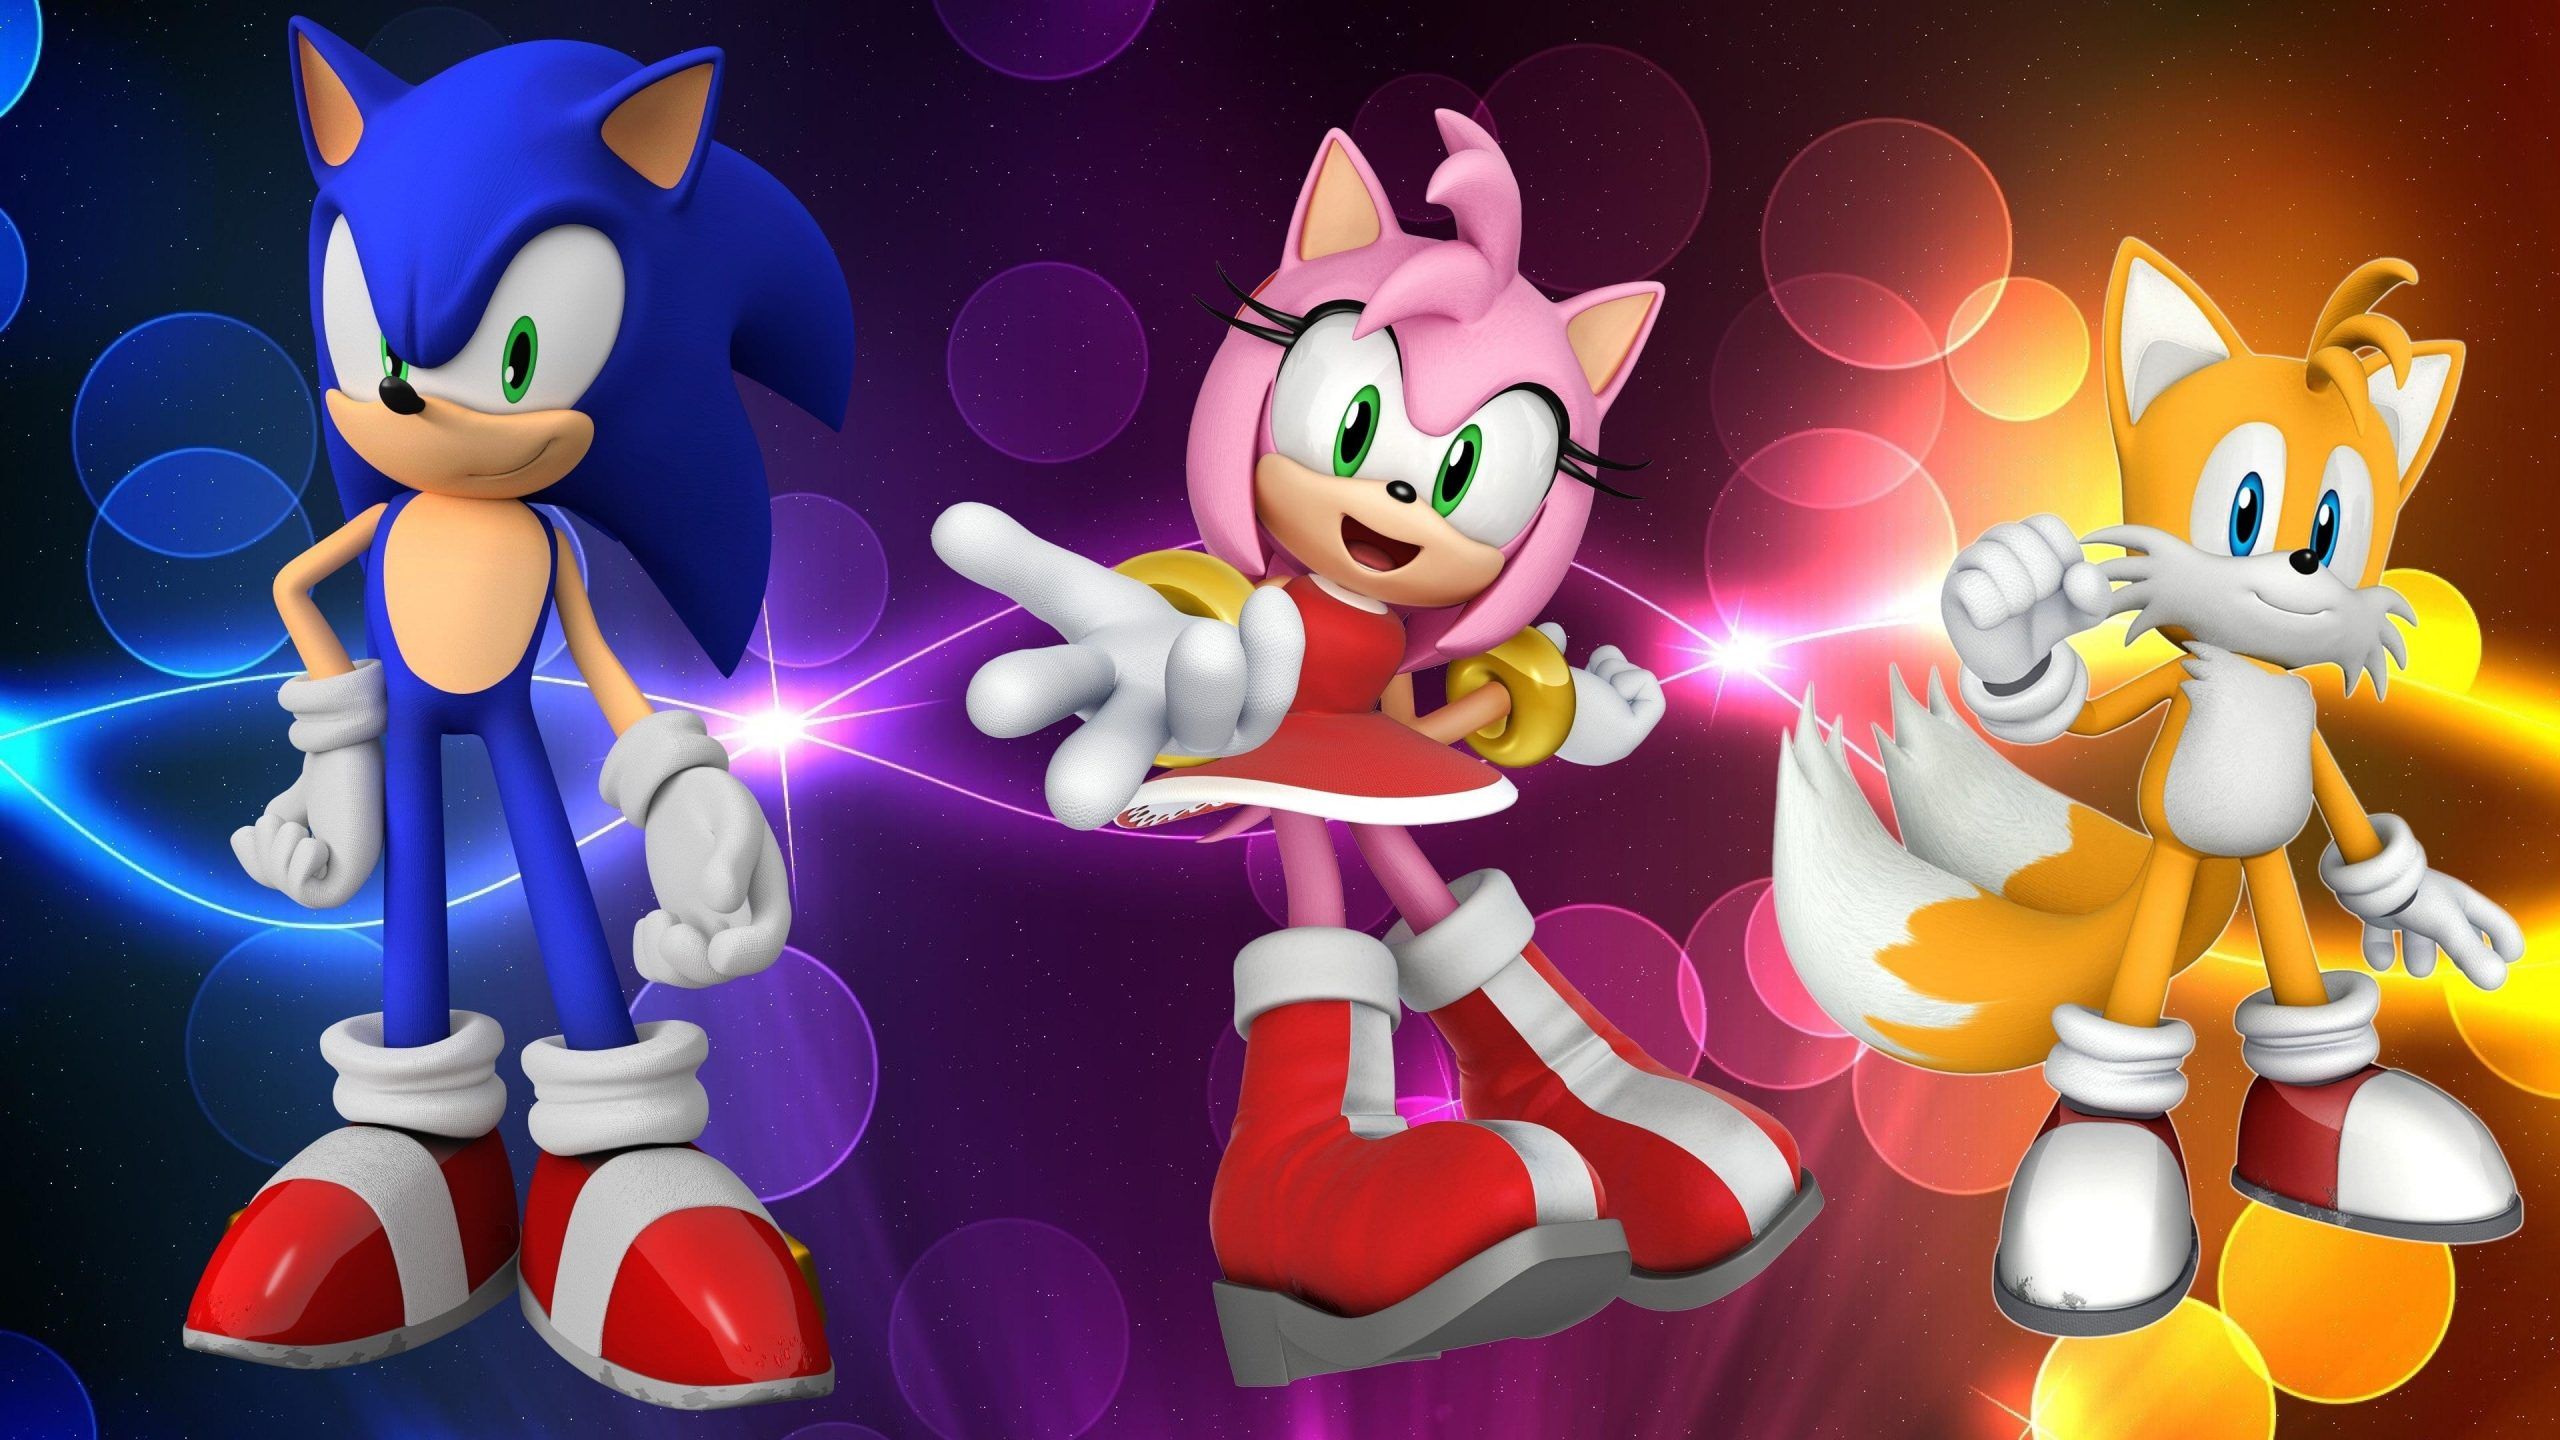 Sonic Amy Tails Sonic Hedgehog 1810 Wallpaper And Free throughout